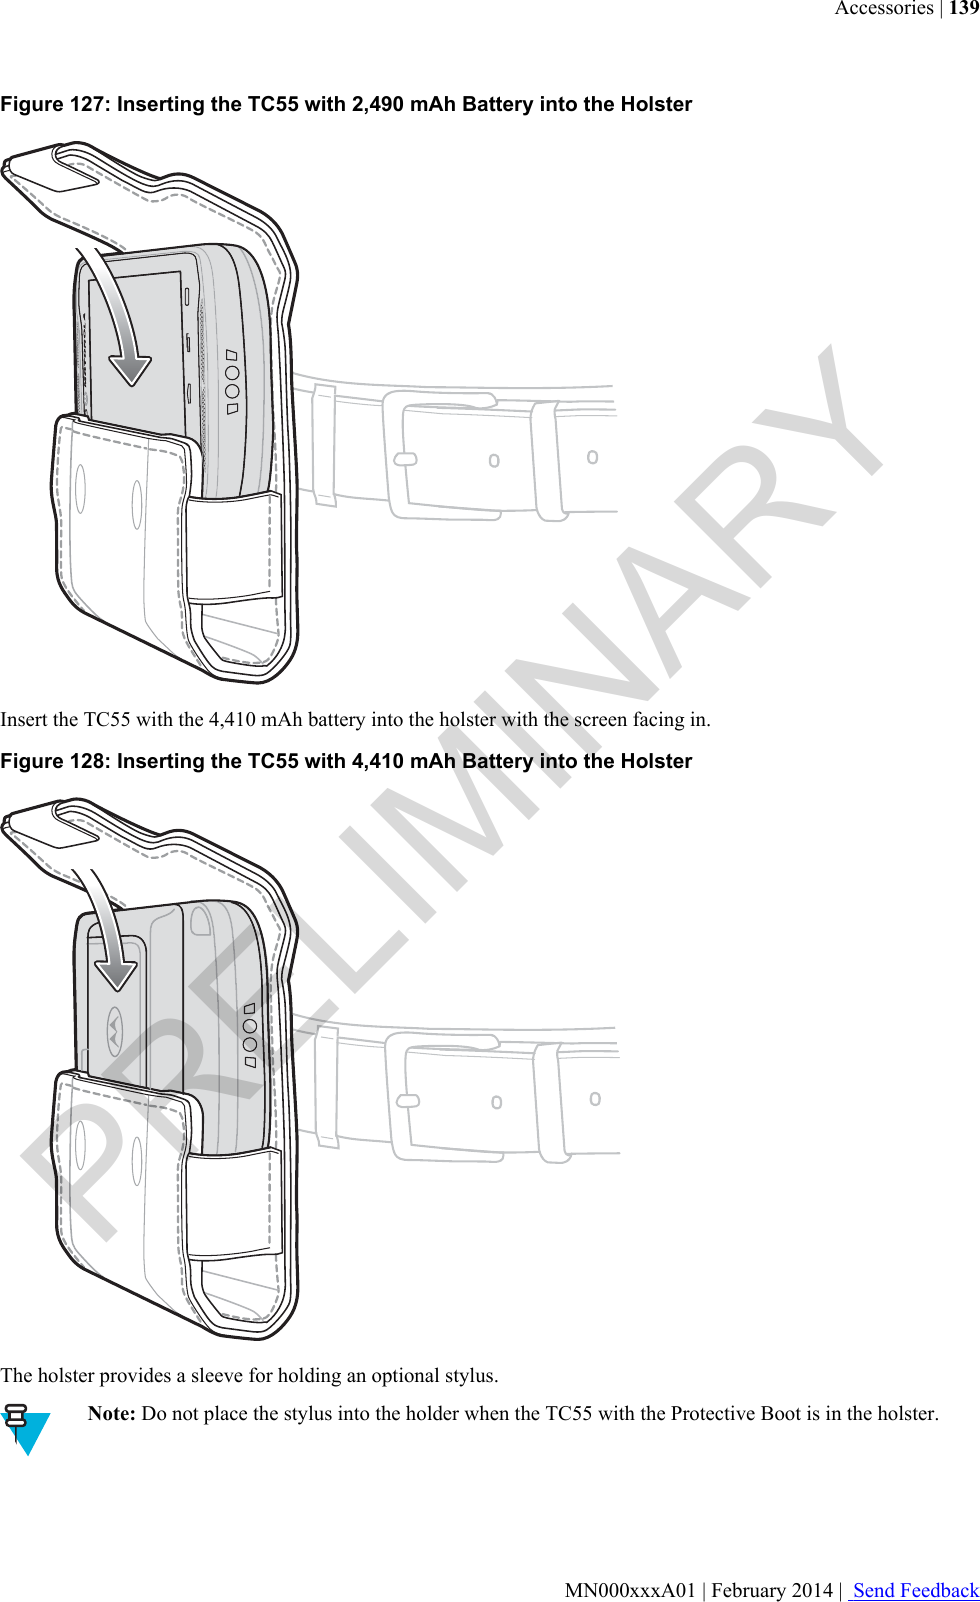 Figure 127: Inserting the TC55 with 2,490 mAh Battery into the HolsterInsert the TC55 with the 4,410 mAh battery into the holster with the screen facing in.Figure 128: Inserting the TC55 with 4,410 mAh Battery into the HolsterThe holster provides a sleeve for holding an optional stylus.Note: Do not place the stylus into the holder when the TC55 with the Protective Boot is in the holster.Accessories | 139MN000xxxA01 | February 2014 |  Send FeedbackPRELIMINARY